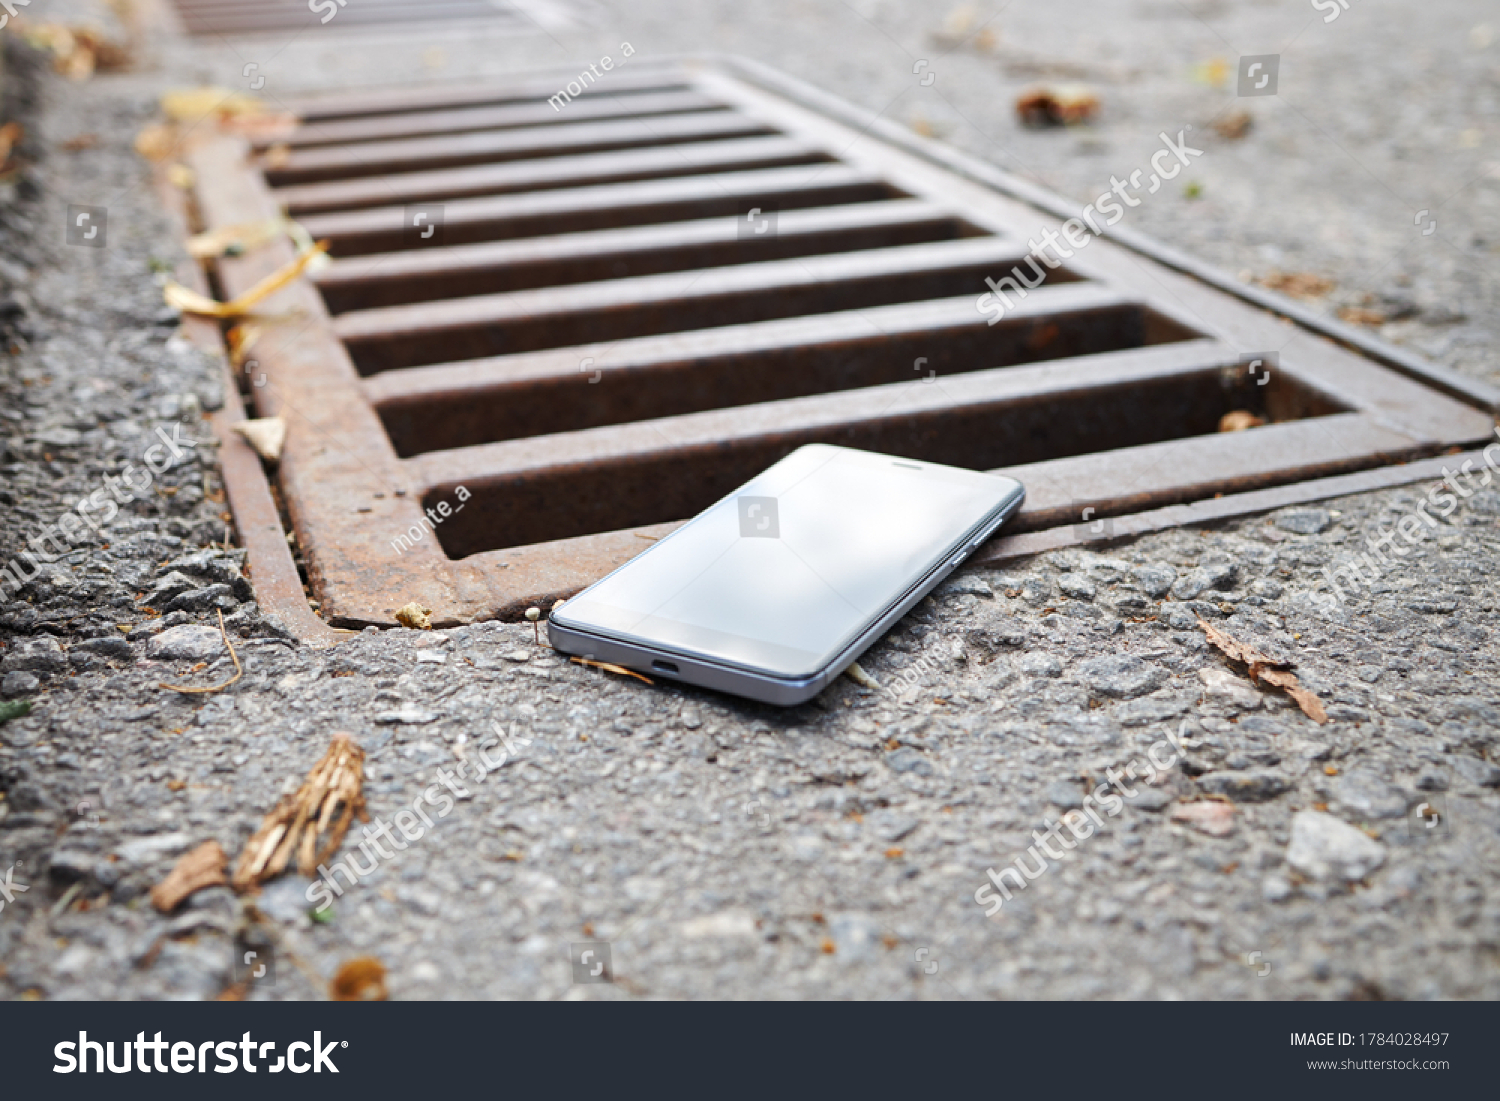 lost smart phone device laying on the ground near rain drain at city street.  #1784028497